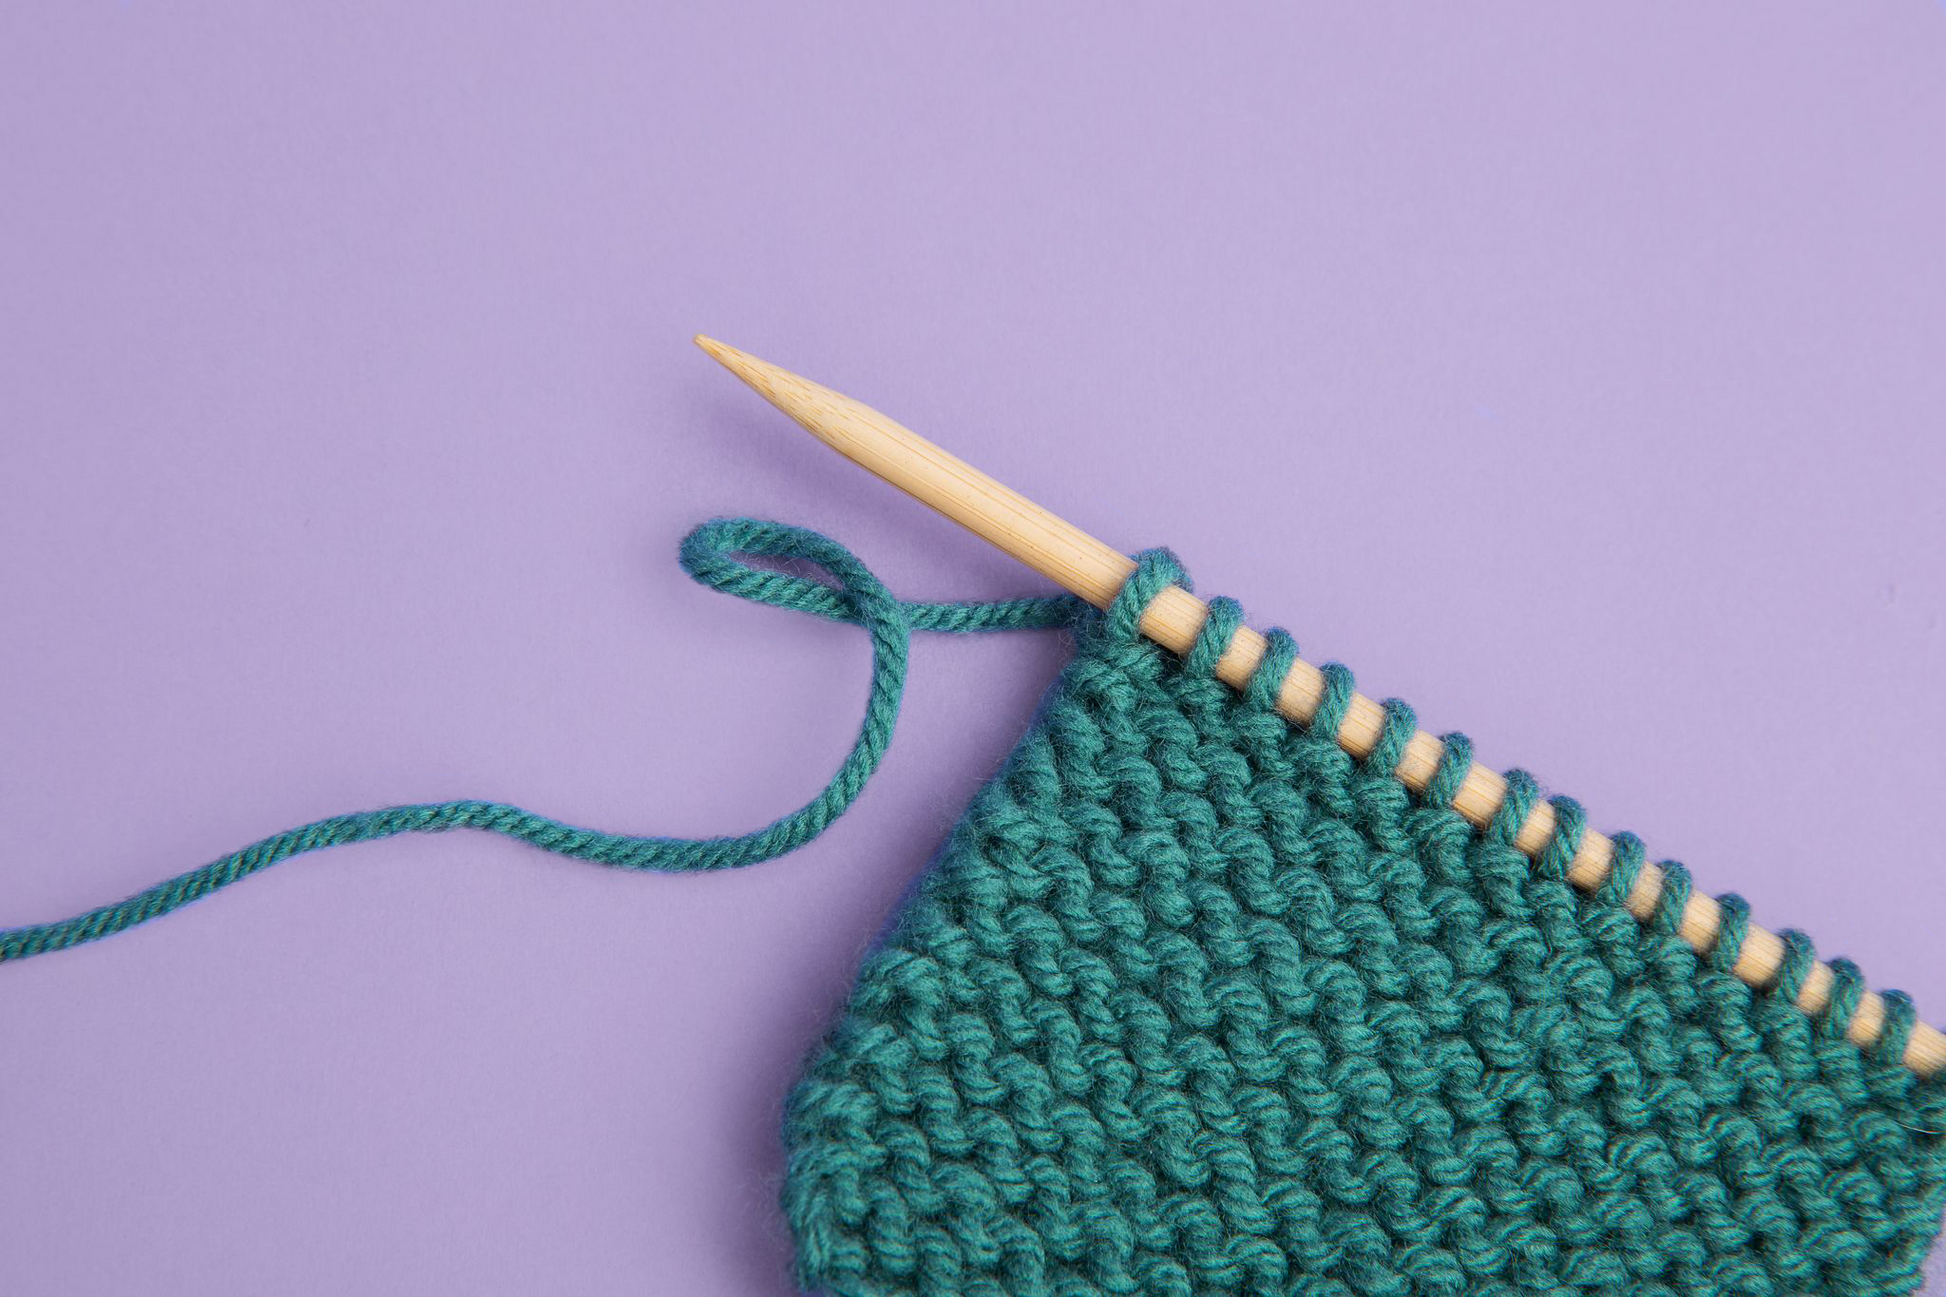 Learn to Knit Kit at WEBS